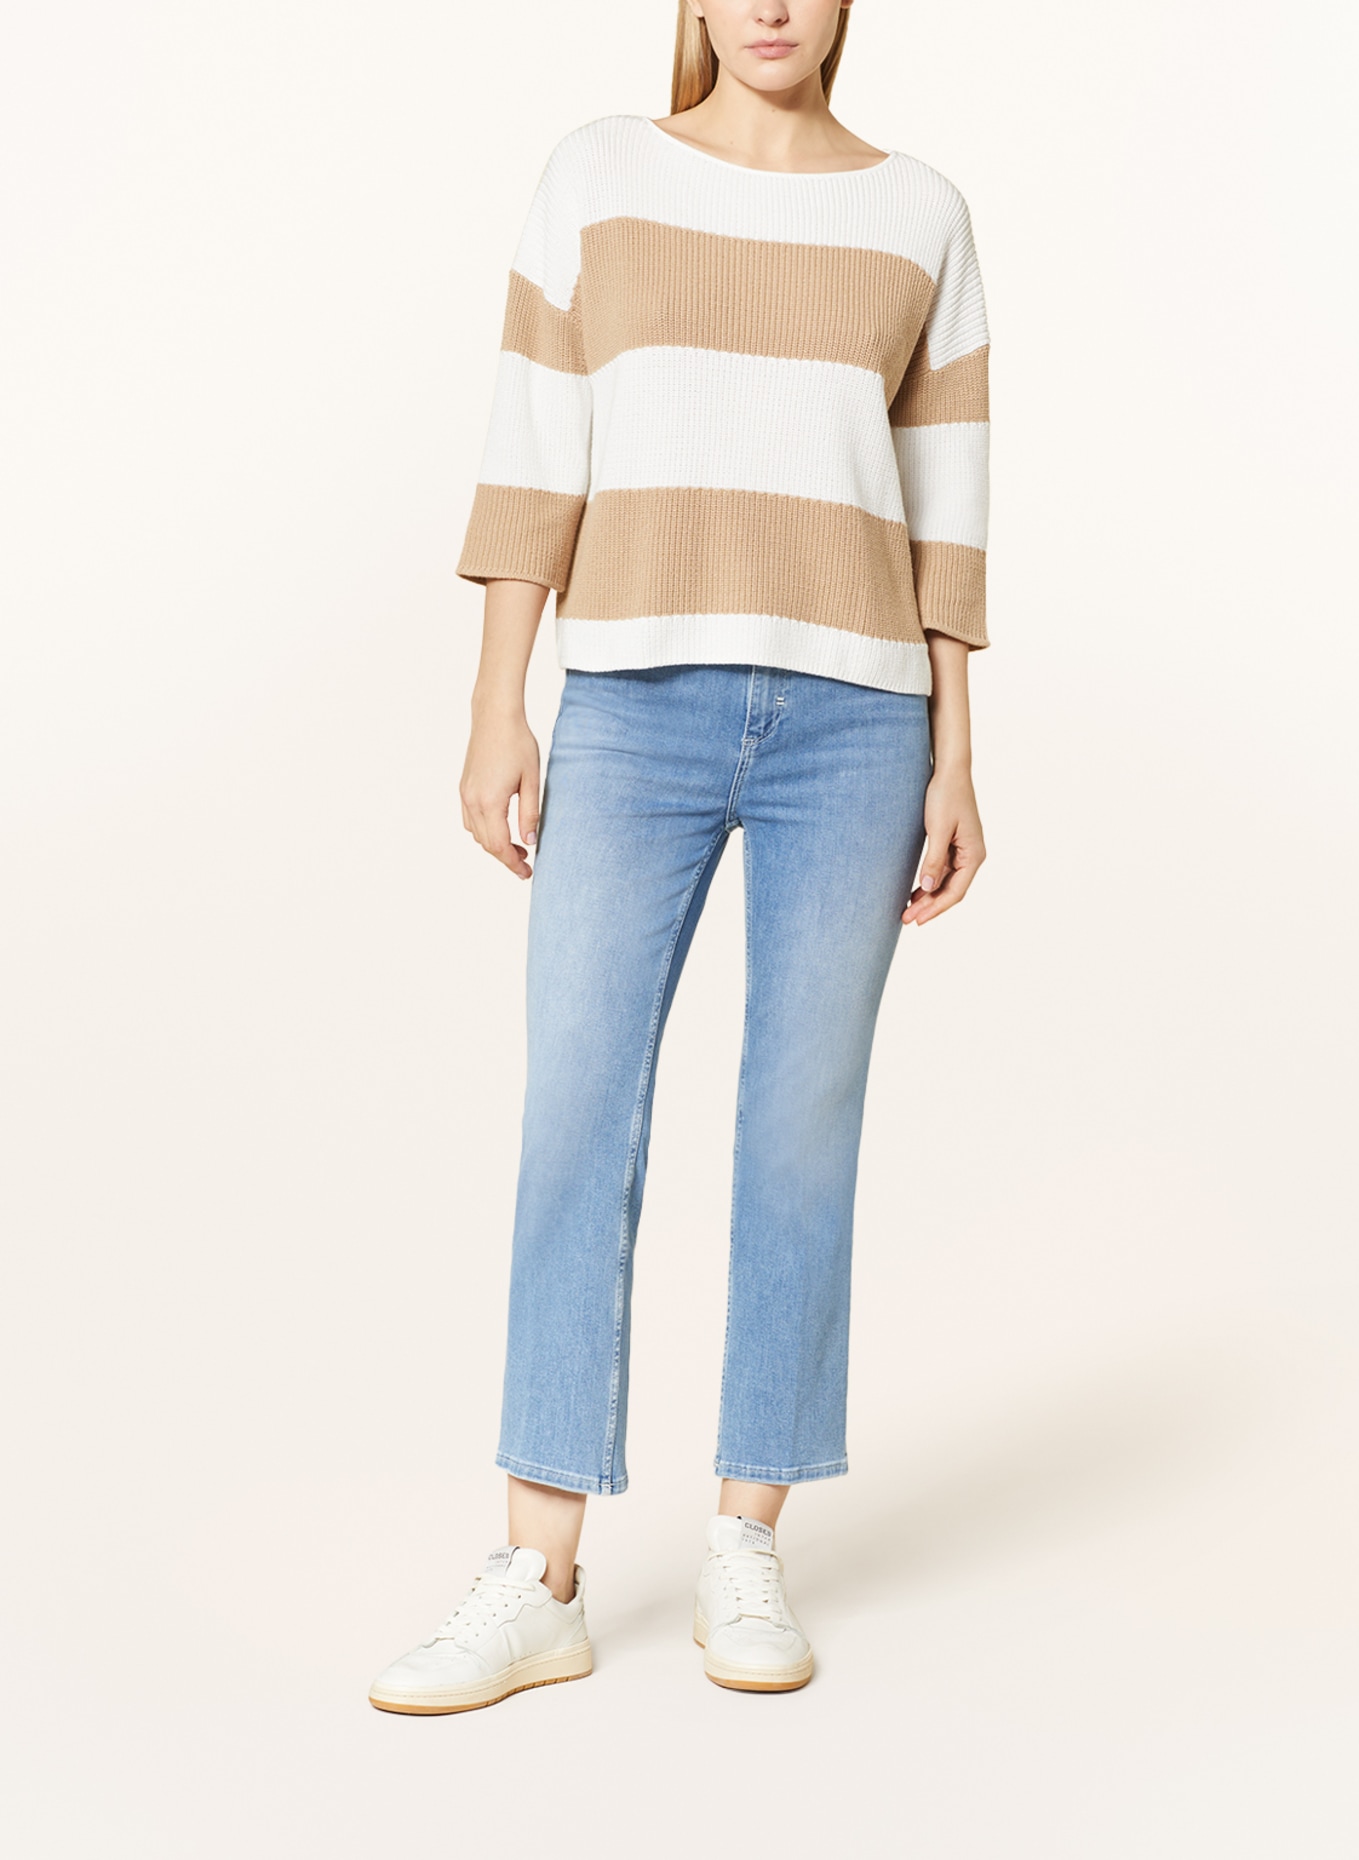 comma casual identity Pullover mit 3/4-Arm, Farbe: CAMEL/ WEISS (Bild 2)